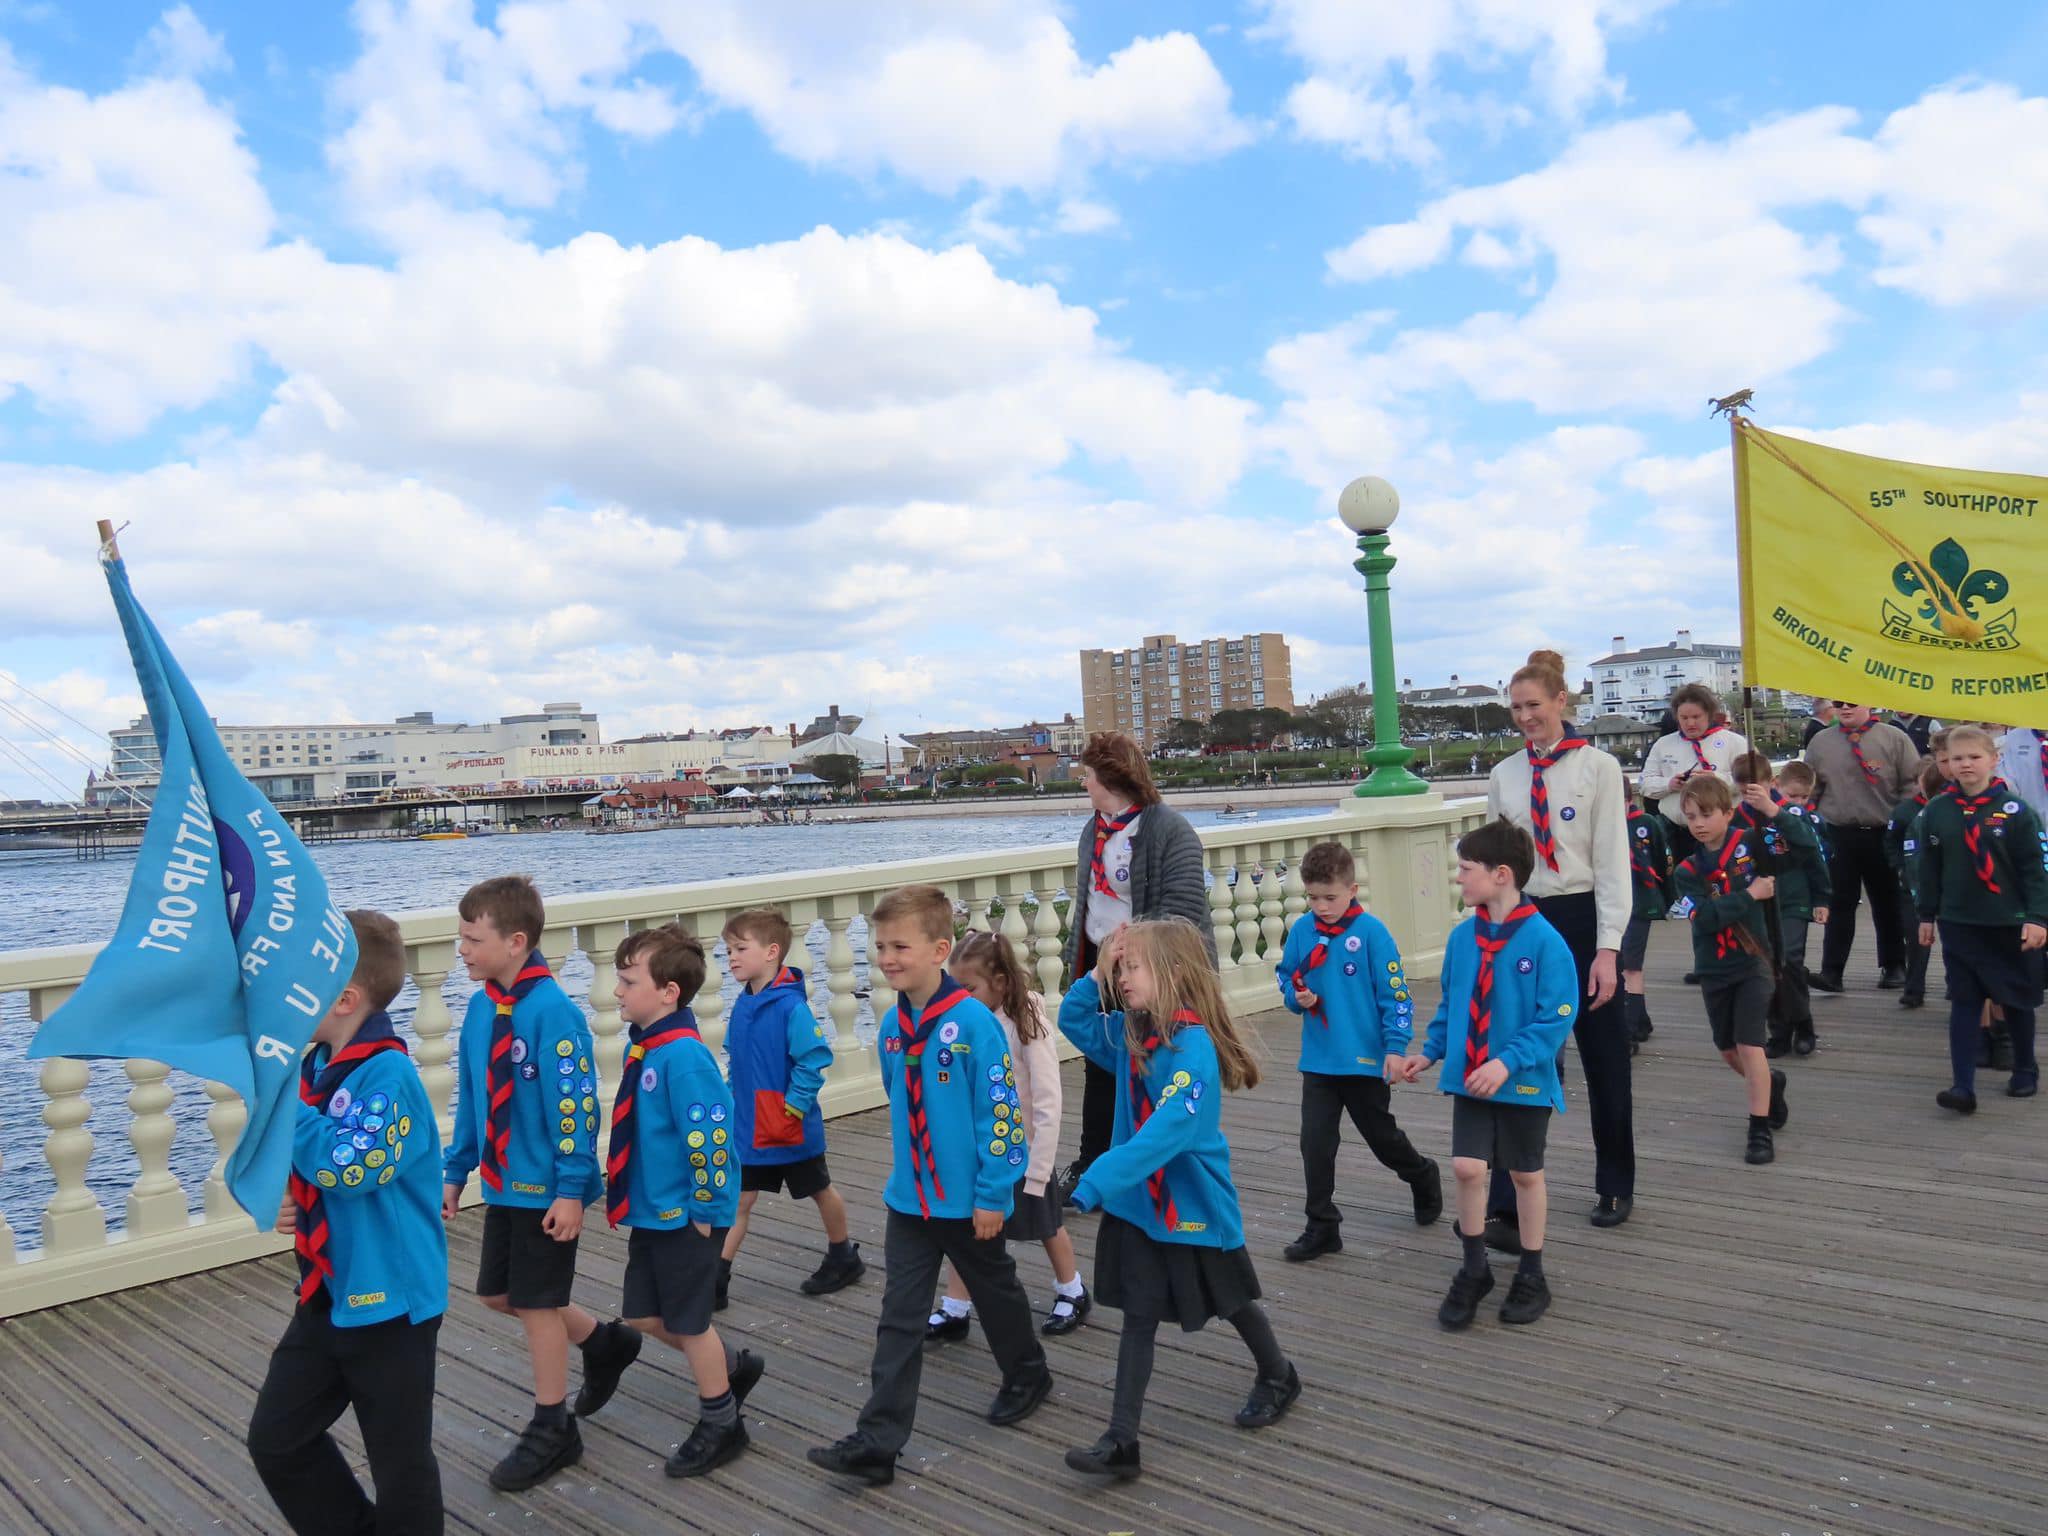 Cubs, Scouts and Beavers took part in the 2022 St George's Day Parade in Southport. Photo by Andrew Brown Media